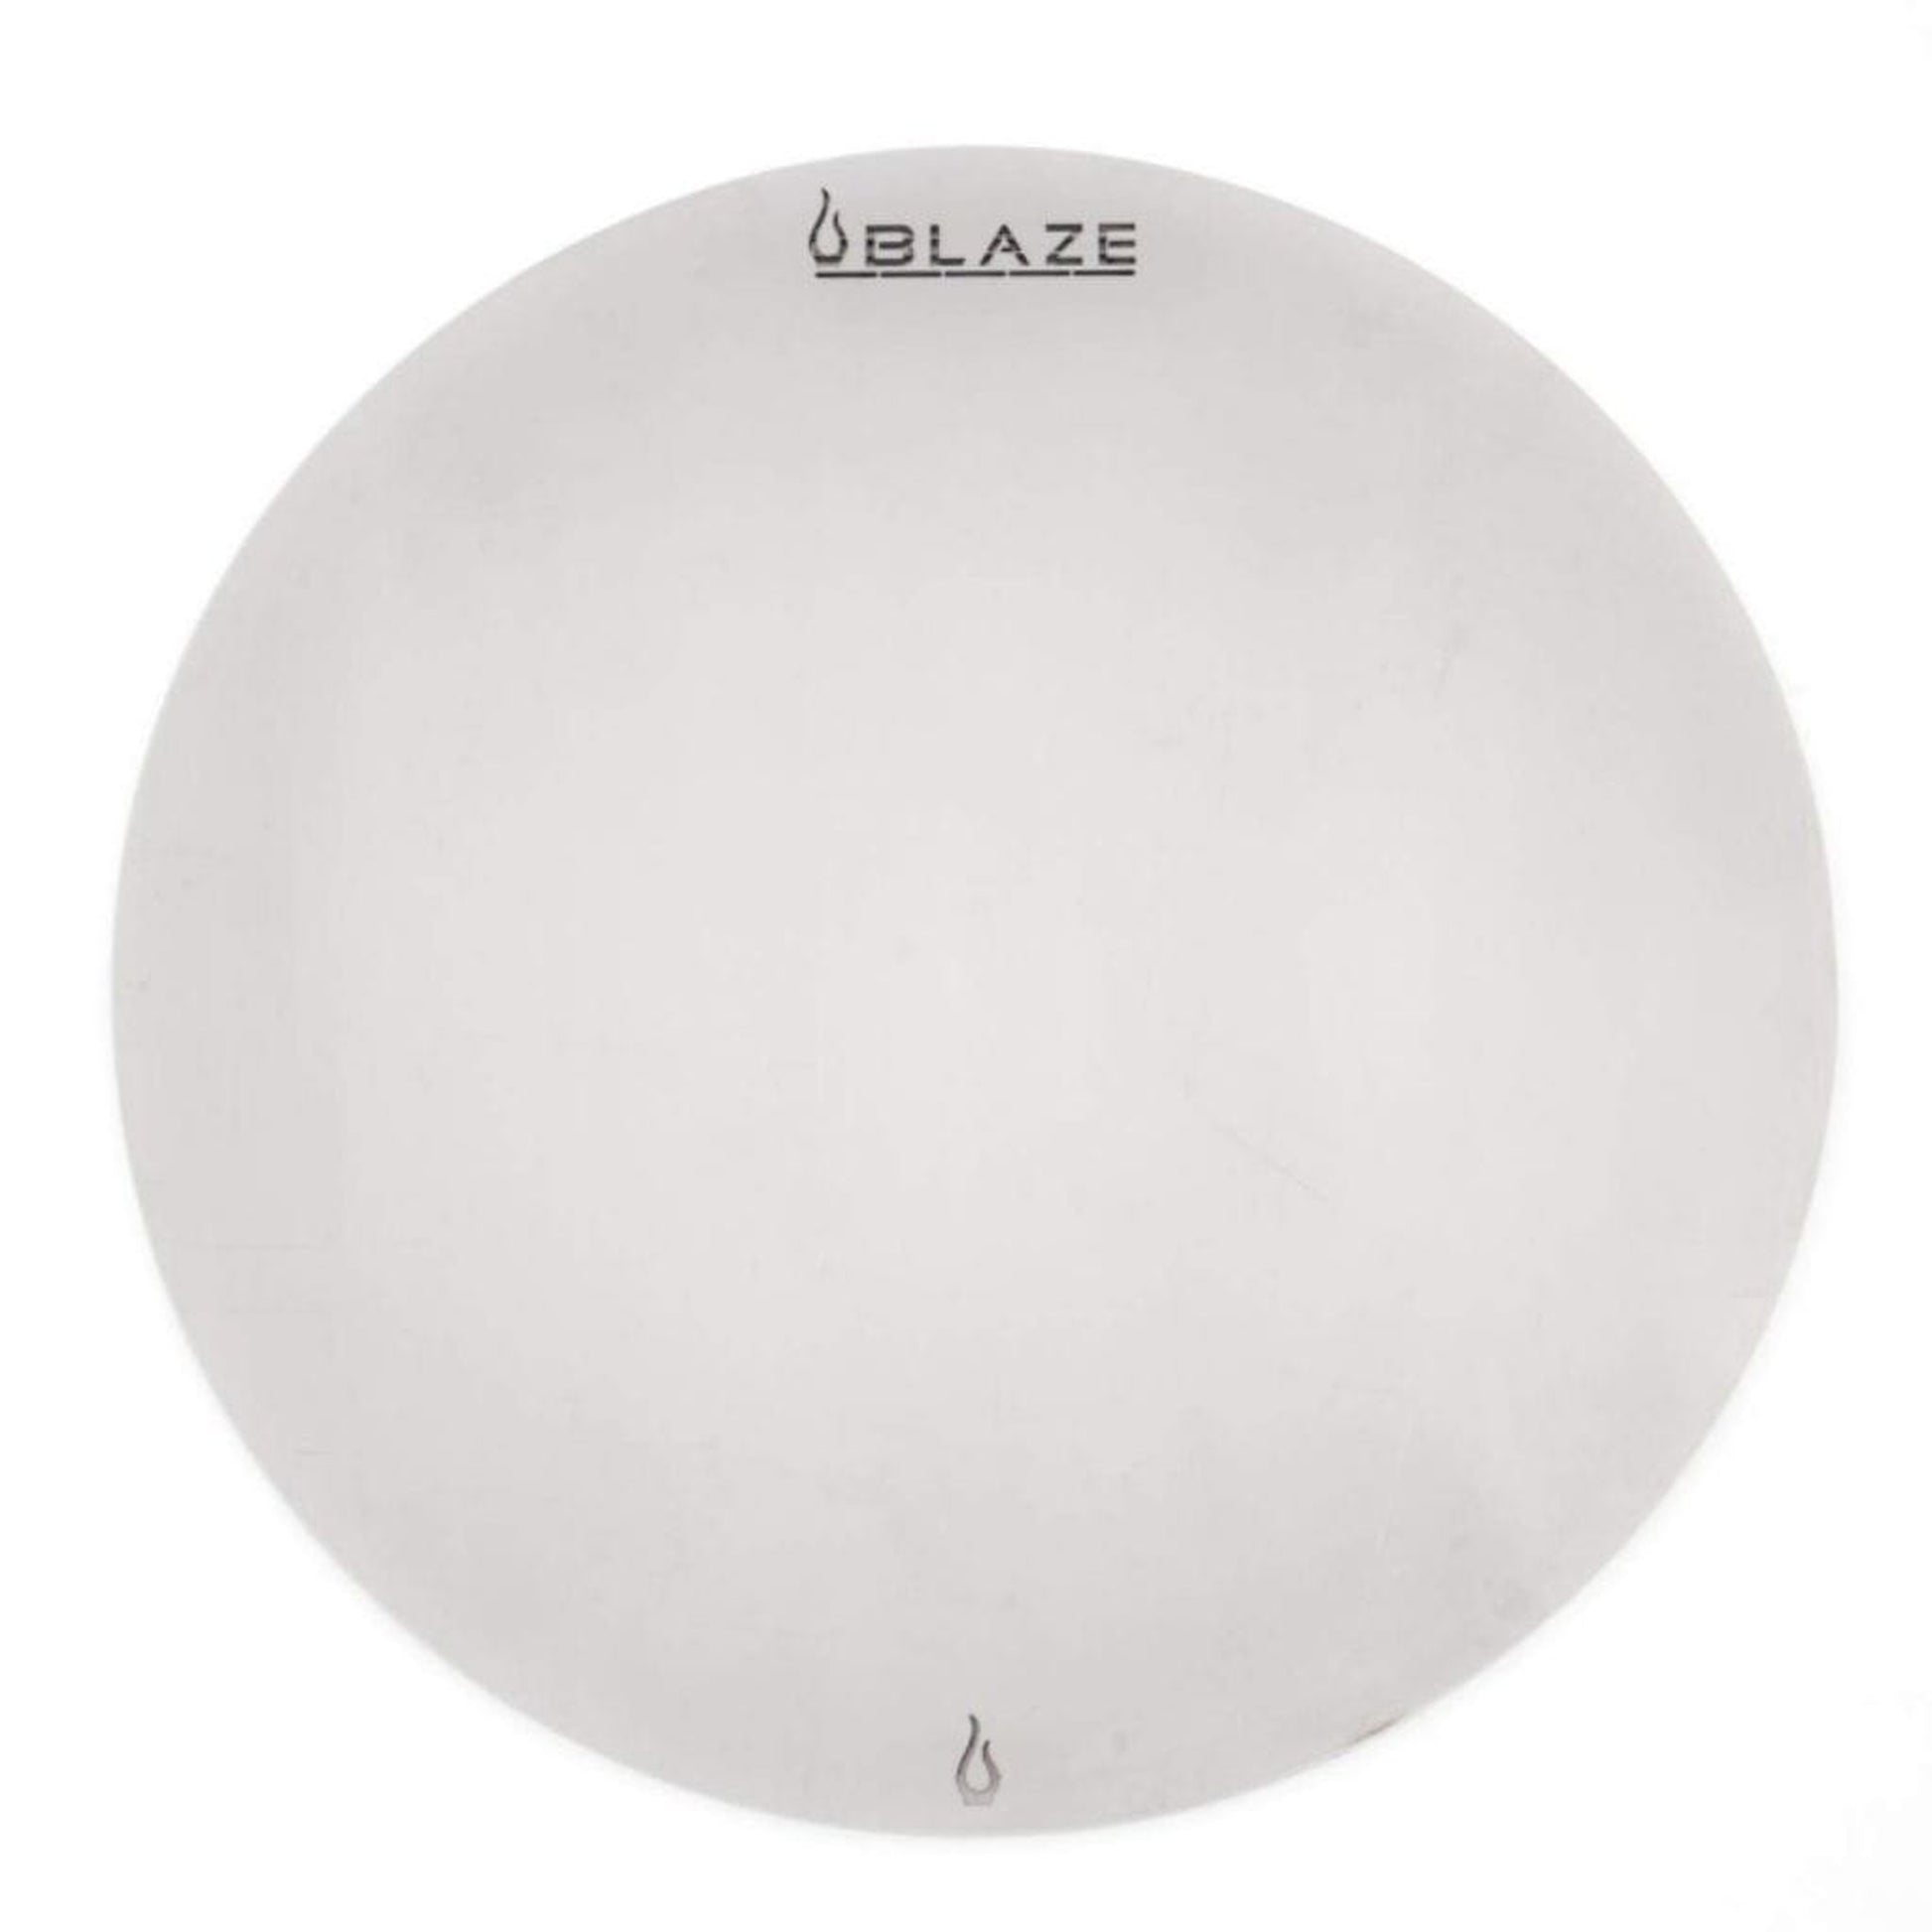 Blaze 15" 4 in 1/Half Round Stainless Steel Cooking Plate/Heat Deflection Plate